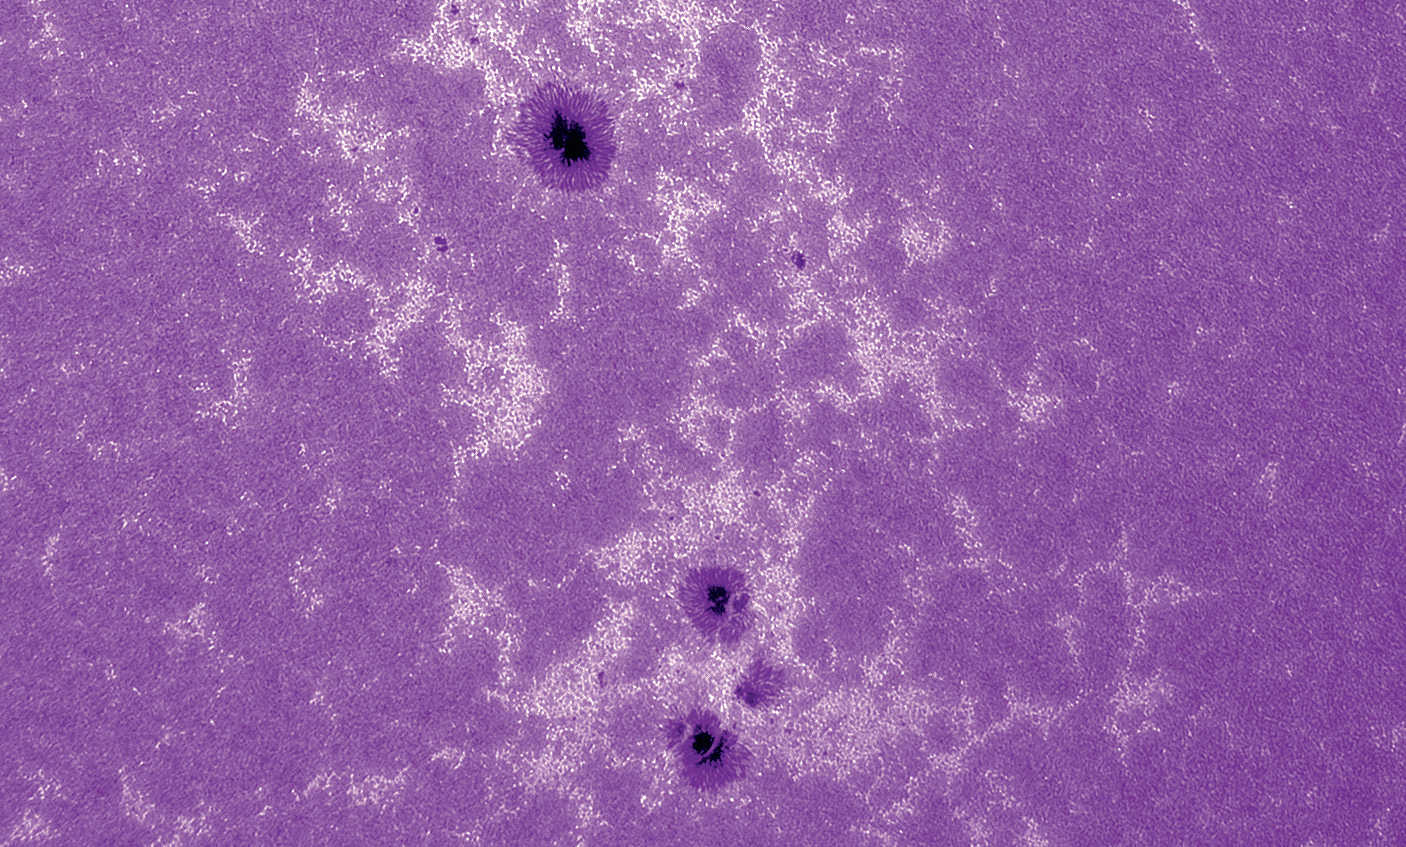 Calcium image of the Sun. Lunt CaK module (B600) on a refractor with 2,250 mm focal length, aperture 130 mm, uncooled CCD camera; 500 of 2,500 frames processed in AviStack and Photoshop. U. Dittler